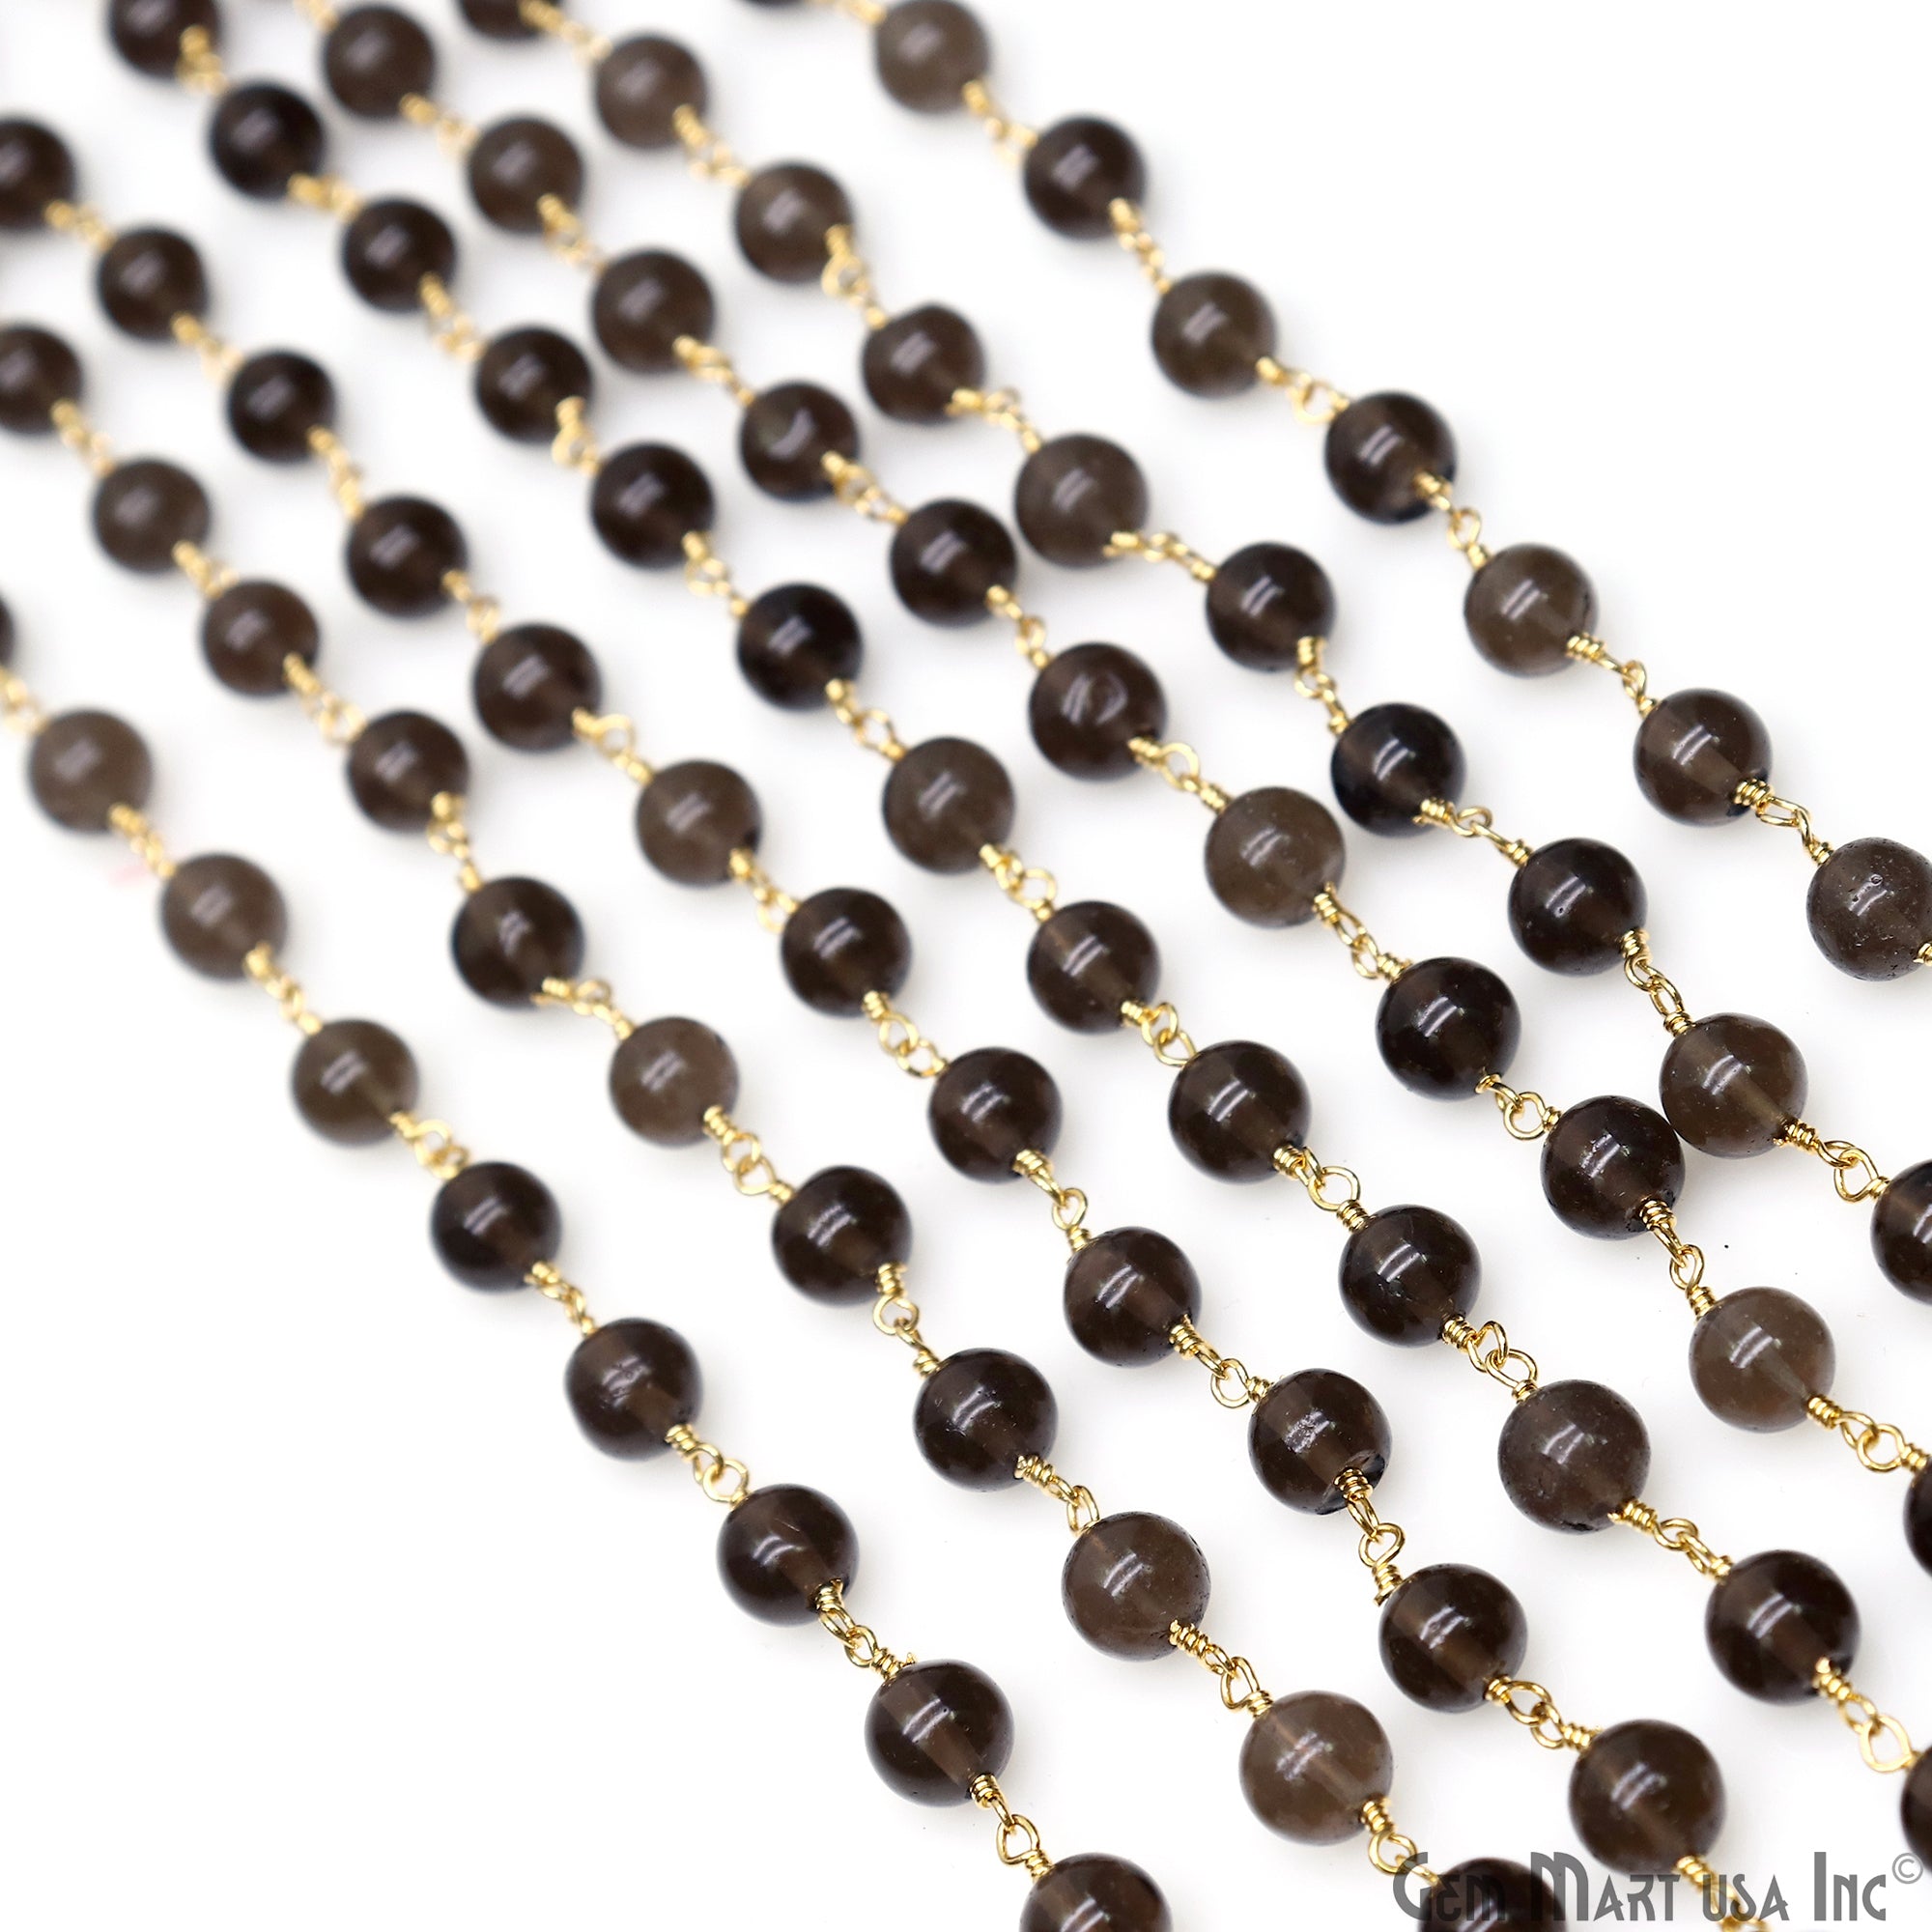 Smoky Topaz Cabochon Beads 6-7mm Gold Wire Wrapped Rosary Chain